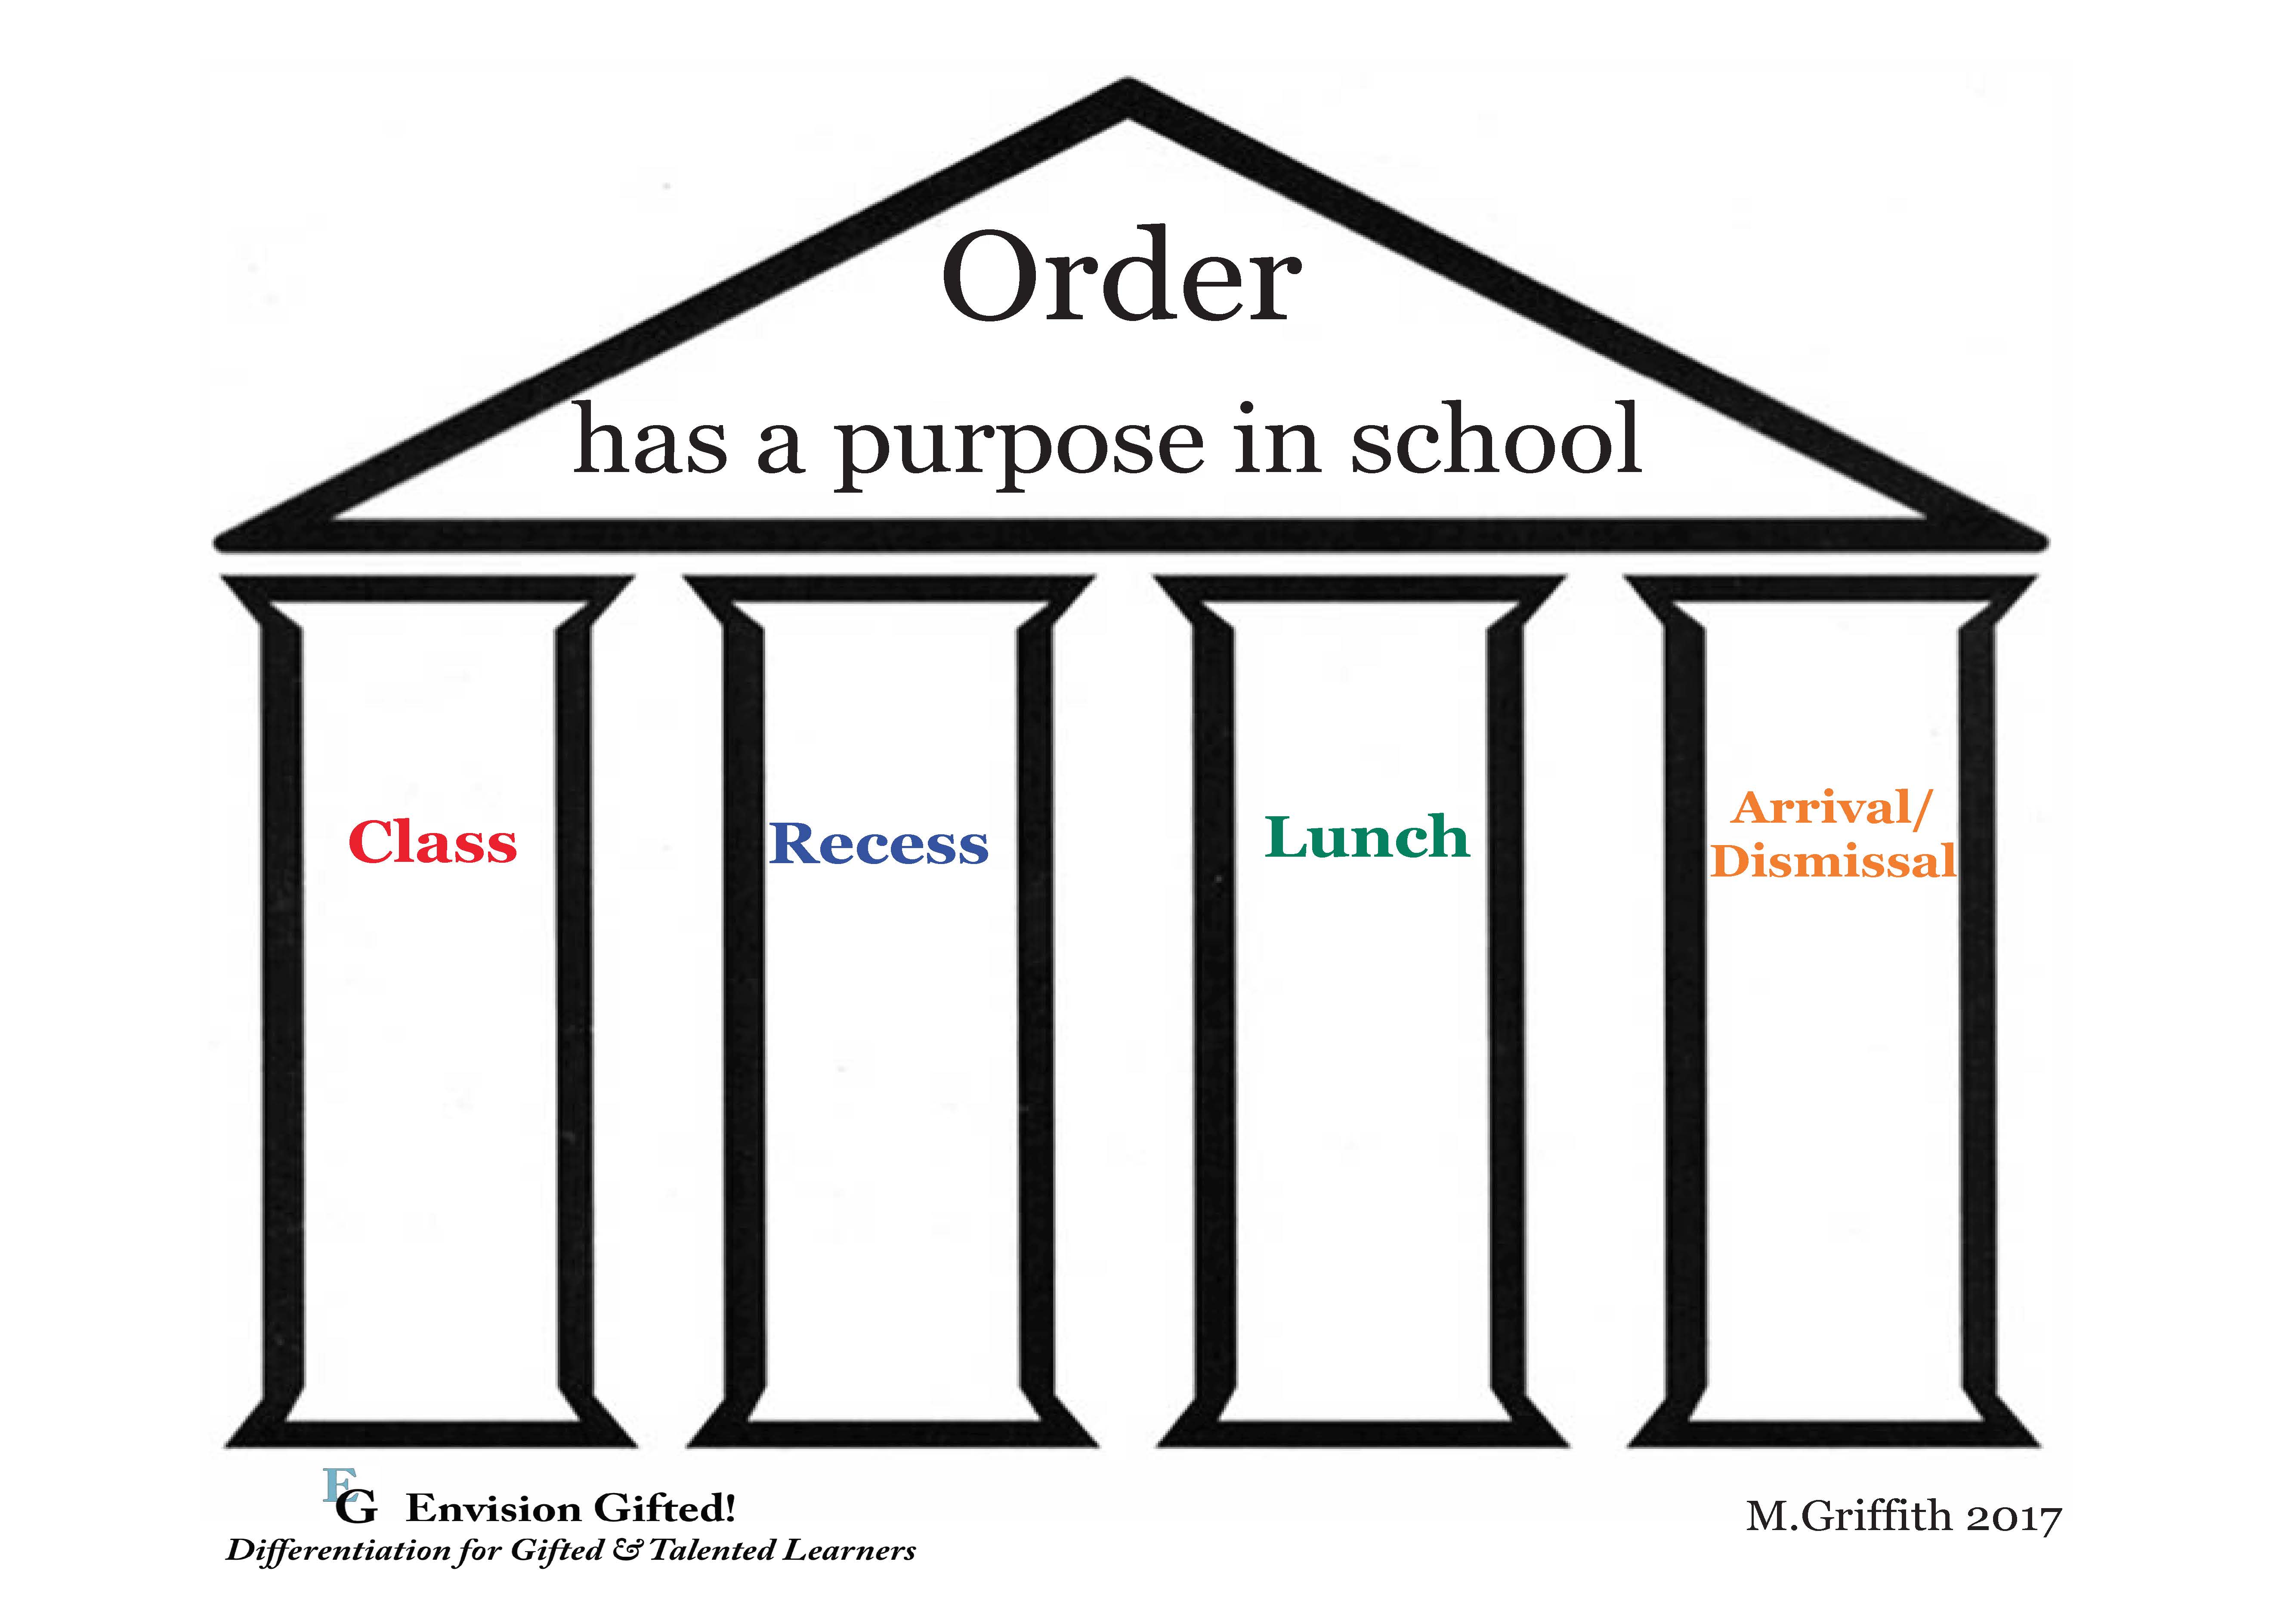 Envision Gifted. Universal Concept Order in School